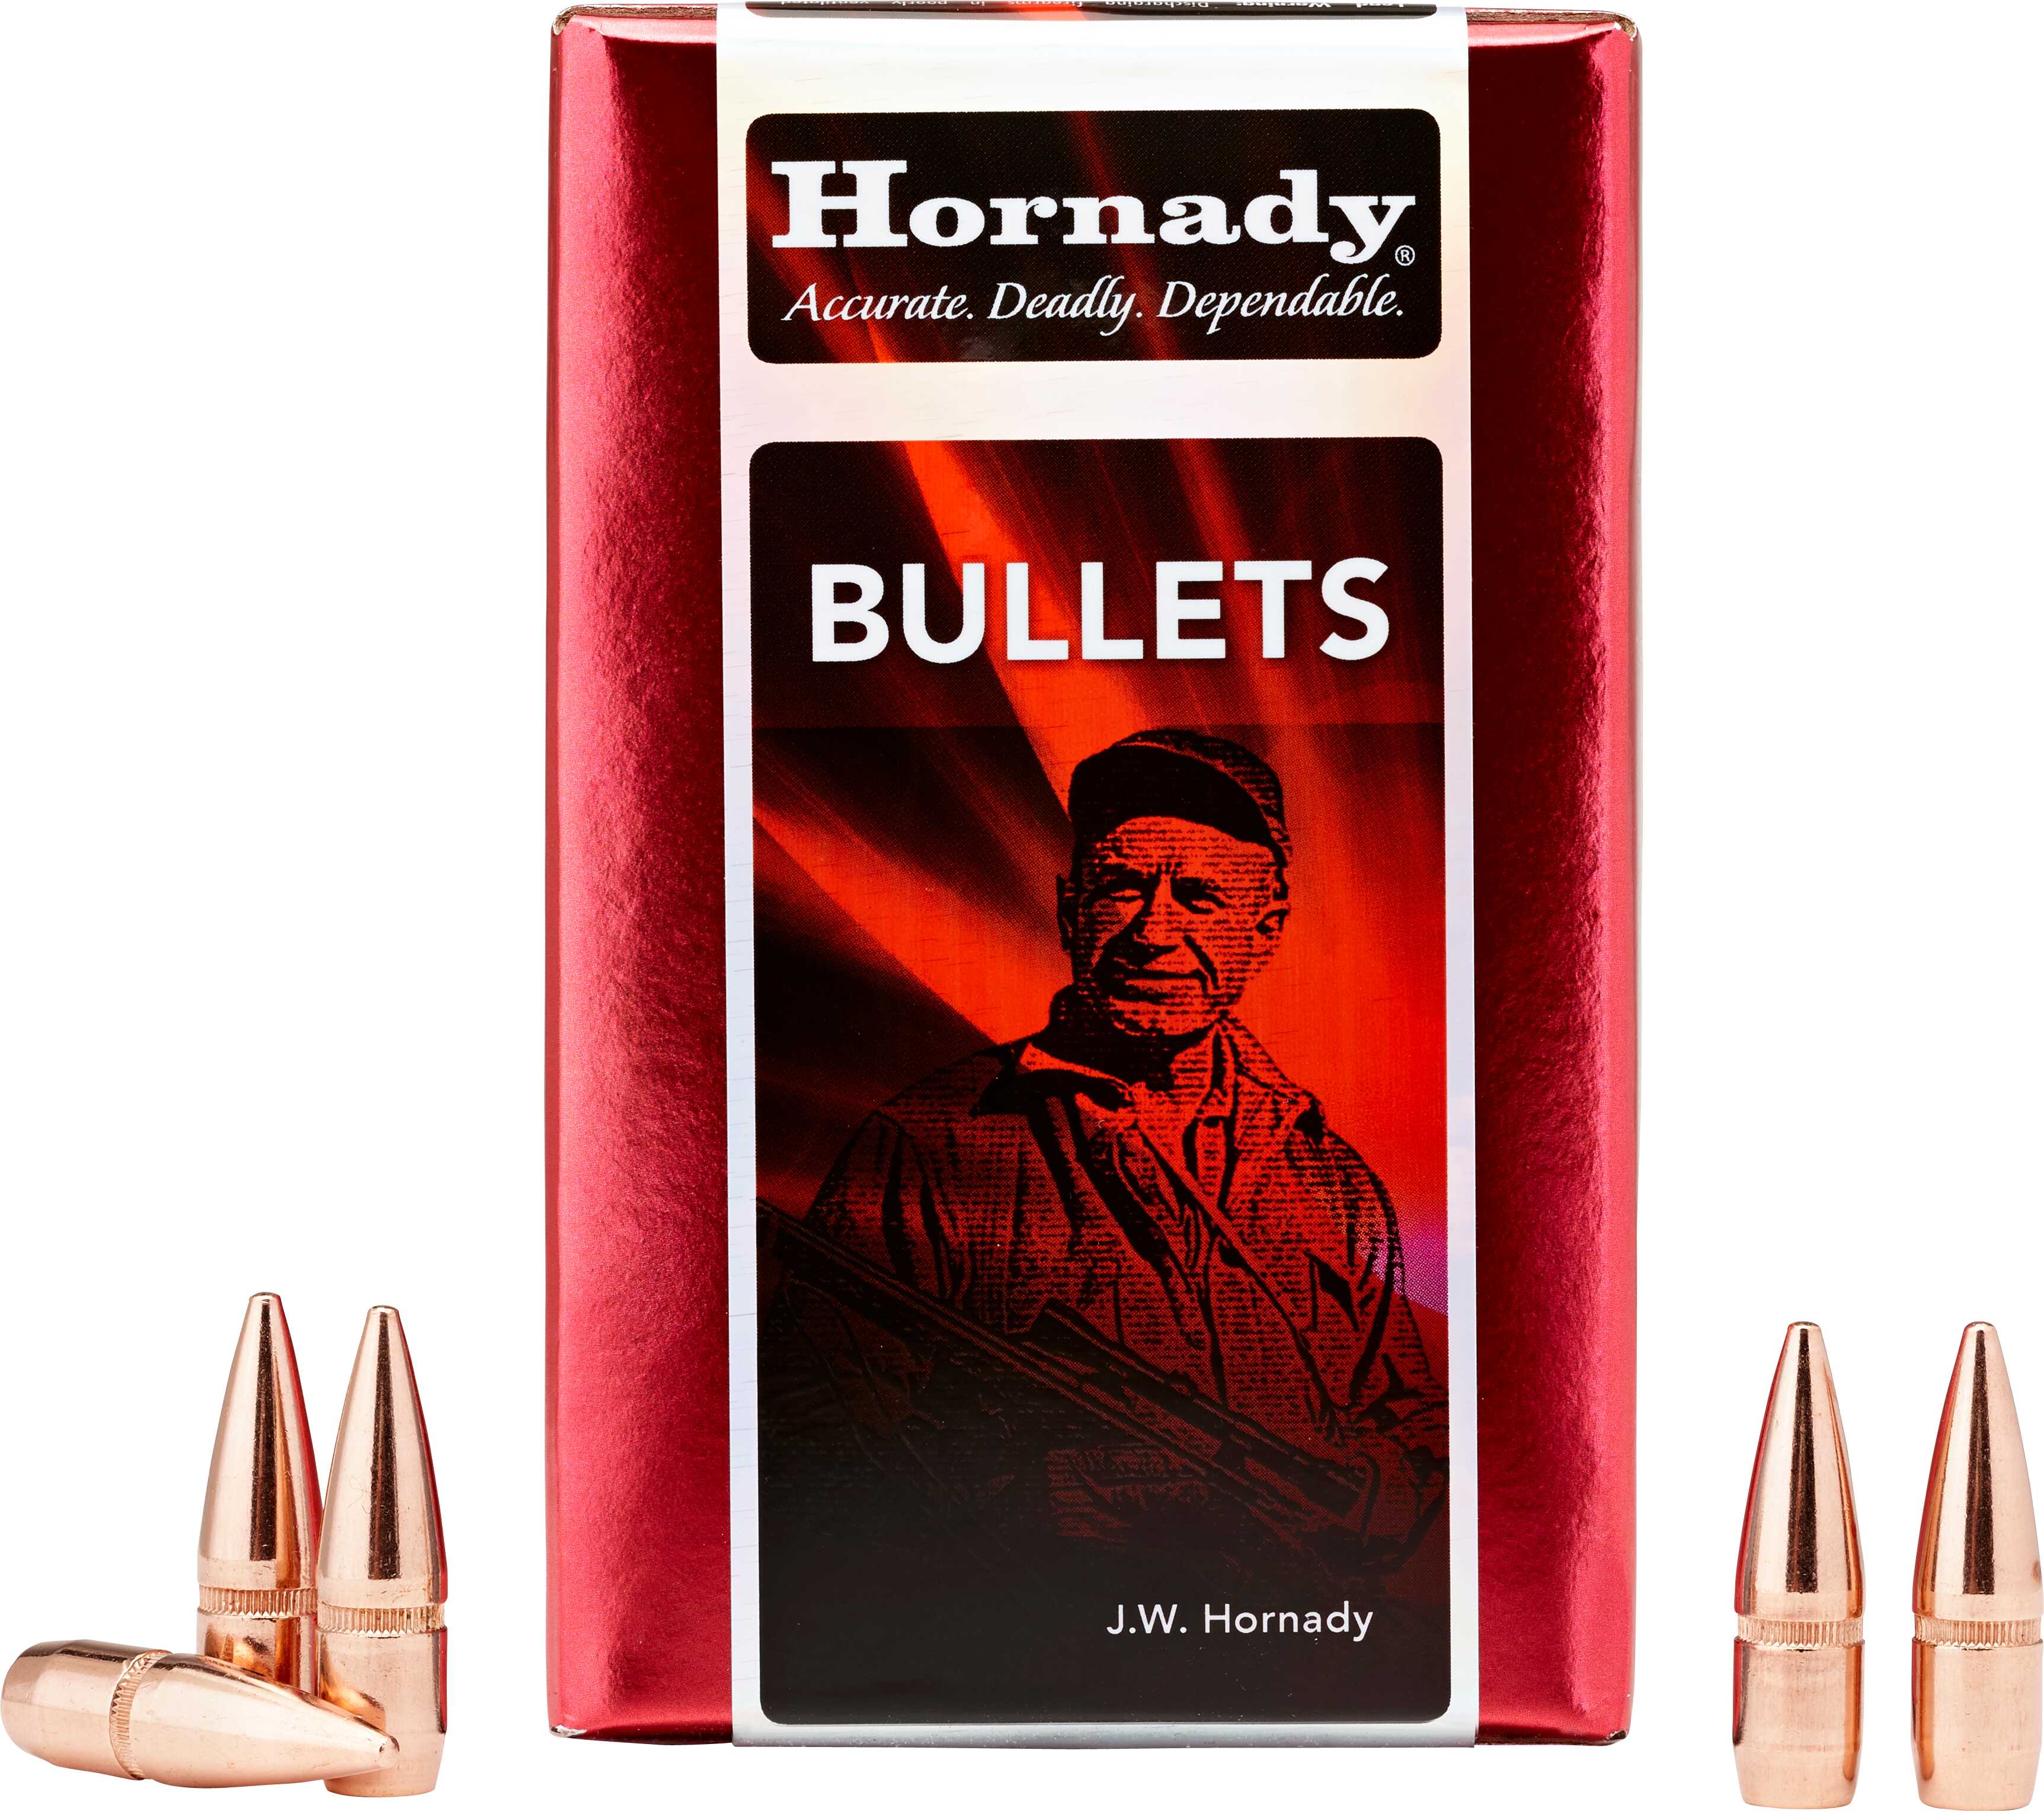 Hornady 338 Caliber 250 Grain Soft Point Recoil Proof Bullets box of 100